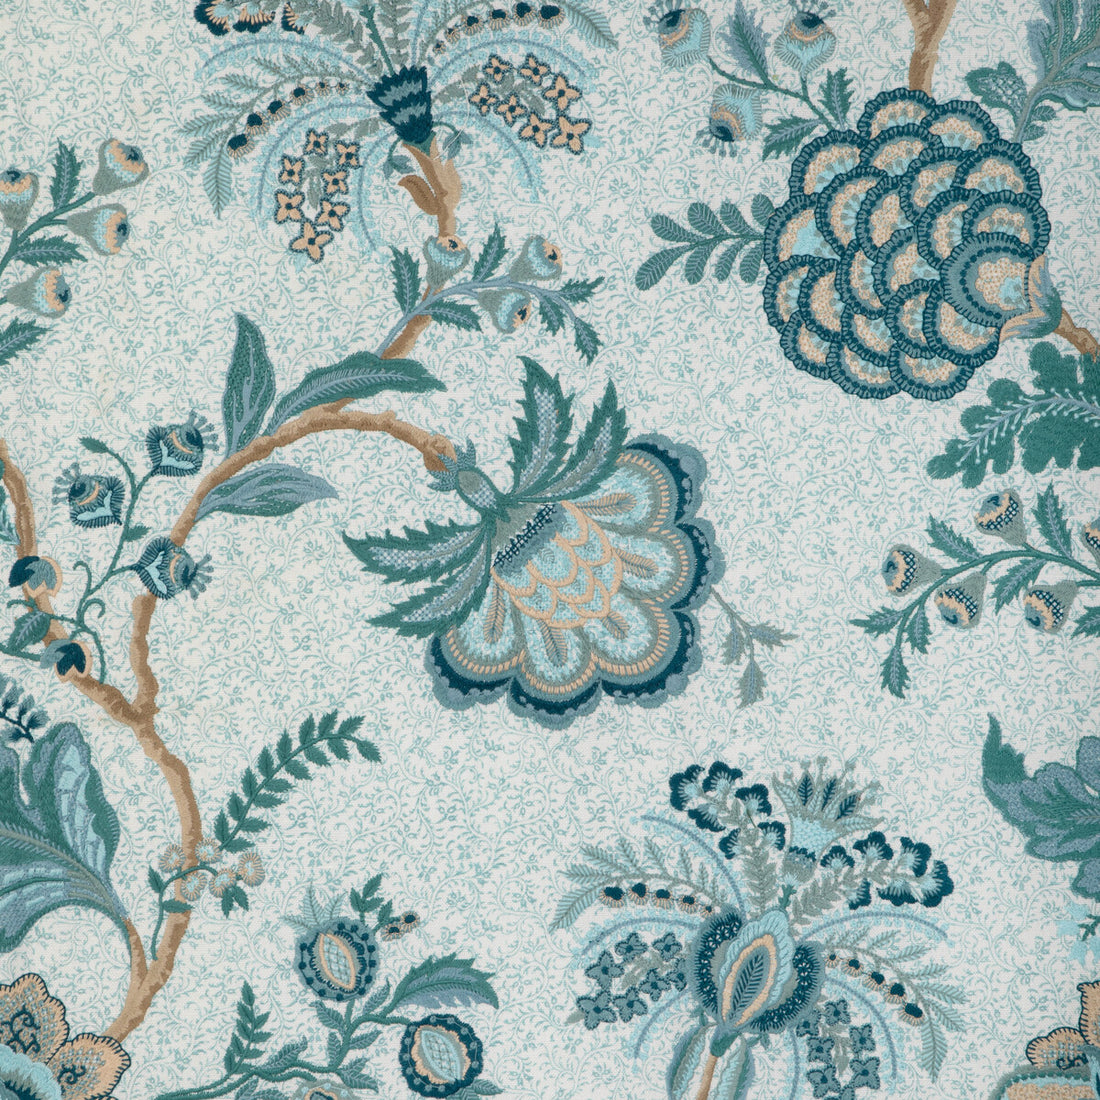 Anduze Emb fabric in teal/sky color - pattern 8023118.535.0 - by Brunschwig &amp; Fils in the Anduze Embroideries collection